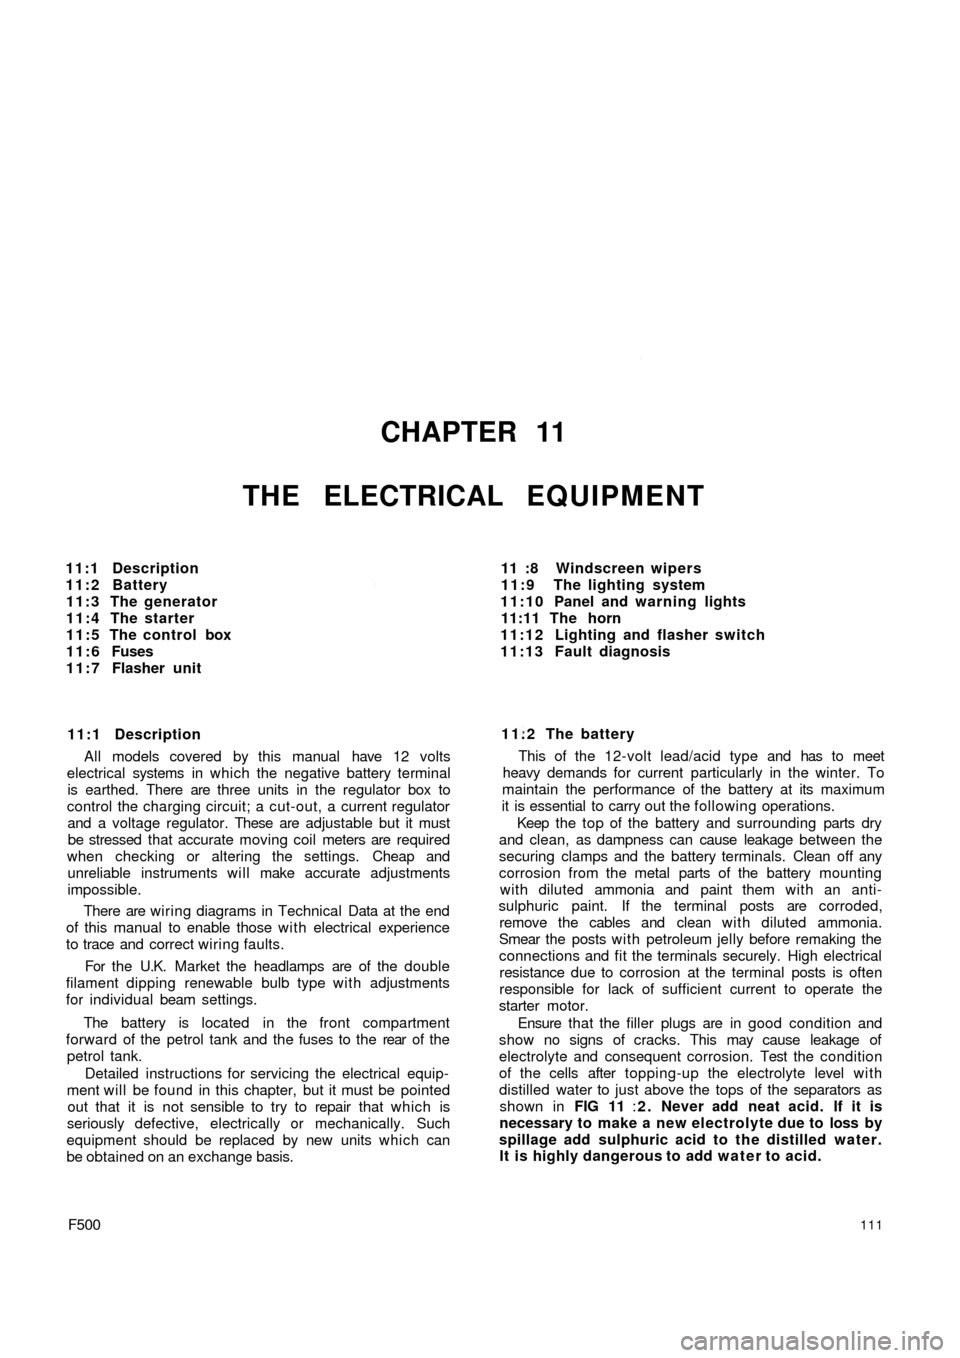 FIAT 500 1967 1.G Workshop Manual CHAPTER 11
THE ELECTRICAL EQUIPMENT
11:1 Description
11:2 Battery
11:3 The generator
11:4 The starter
11:5 The control box
1 1 : 6 Fuses
1 1 : 7 Flasher unit
11:1 Description
All models covered by thi